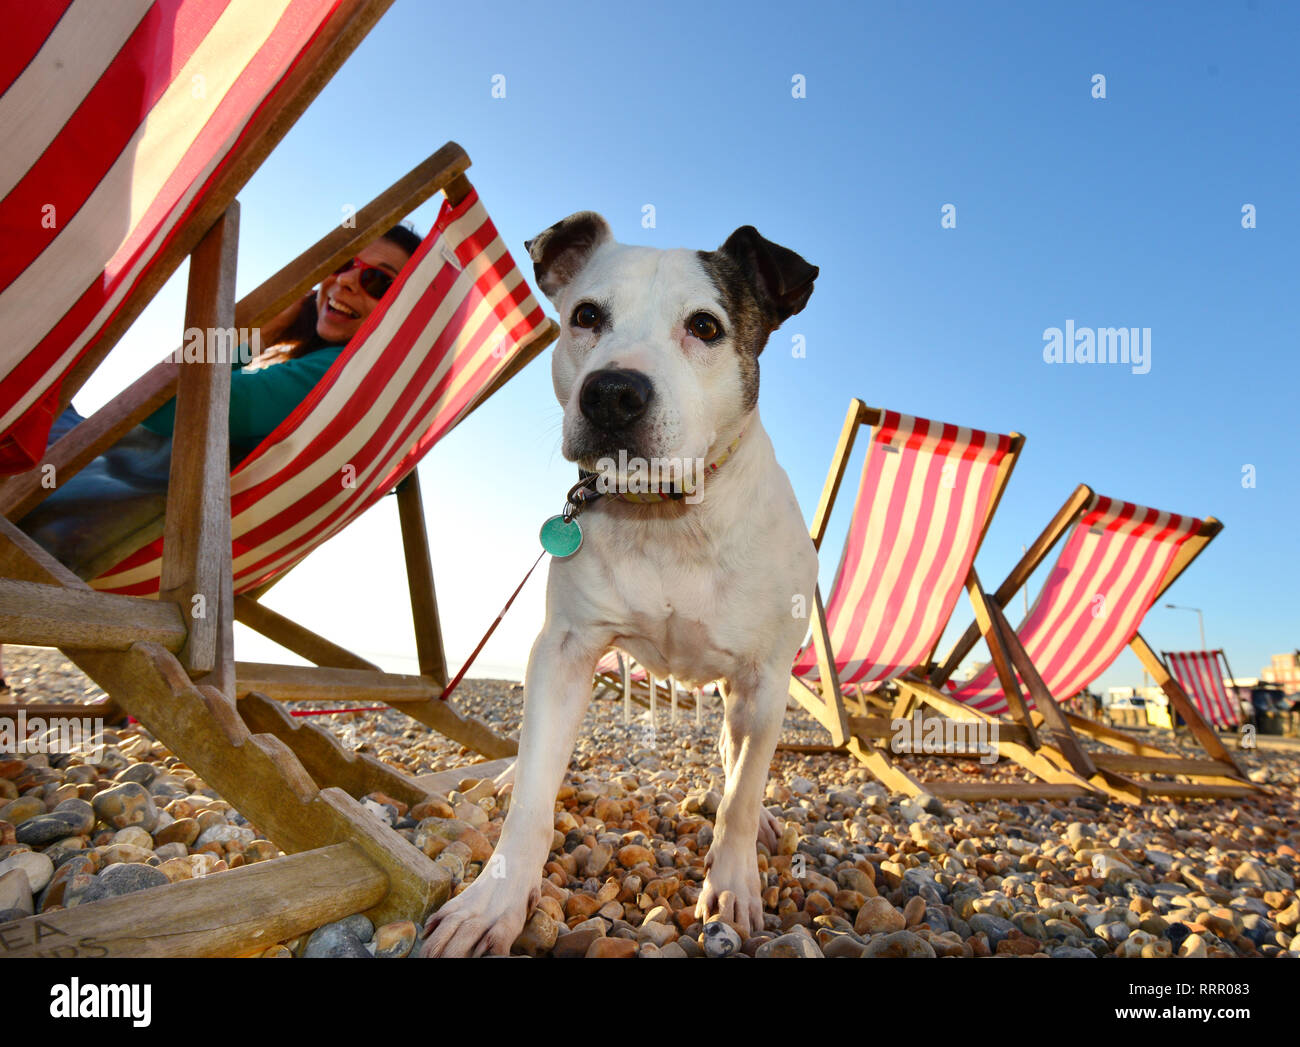 Seaford, East Sussex, UK. 26th Feb, 2019. Sky, a terrier, enjoying the sun on the beach at Seaford on the hottest winter day on record. Credit: Peter Cripps/Alamy Live News Stock Photo